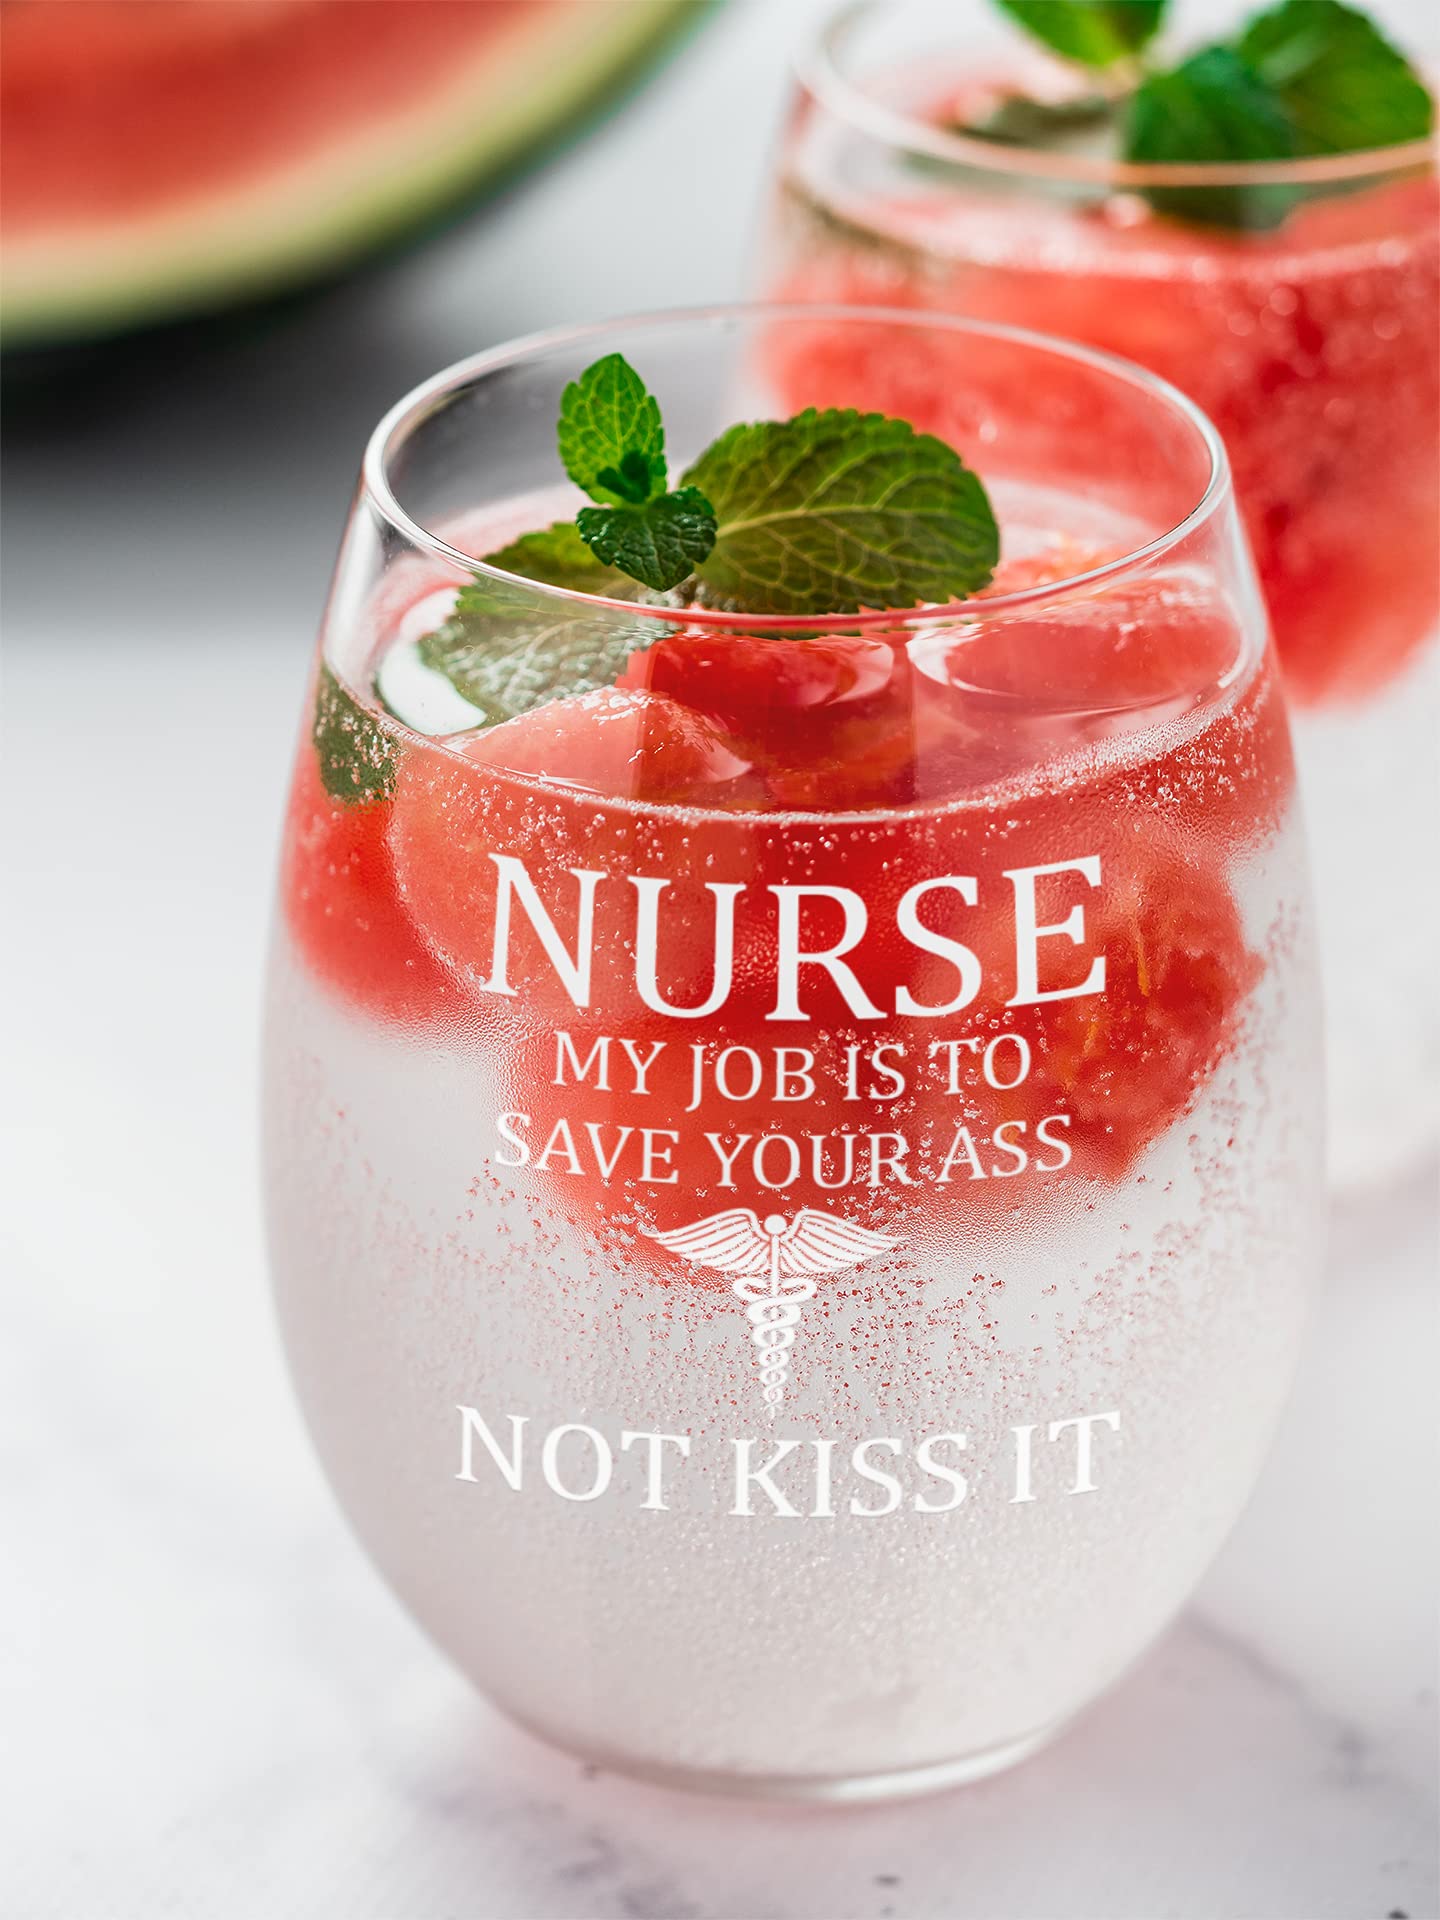 Find Funny Gift Ideas Nurse Wine Glasses for Women | RN Gifts for Nurses Women, ER Nurse Funny Gifts for Nurses Female, Nurses Gifts for Male Nurses | My Job Is To Save Your Rear Not Kiss It